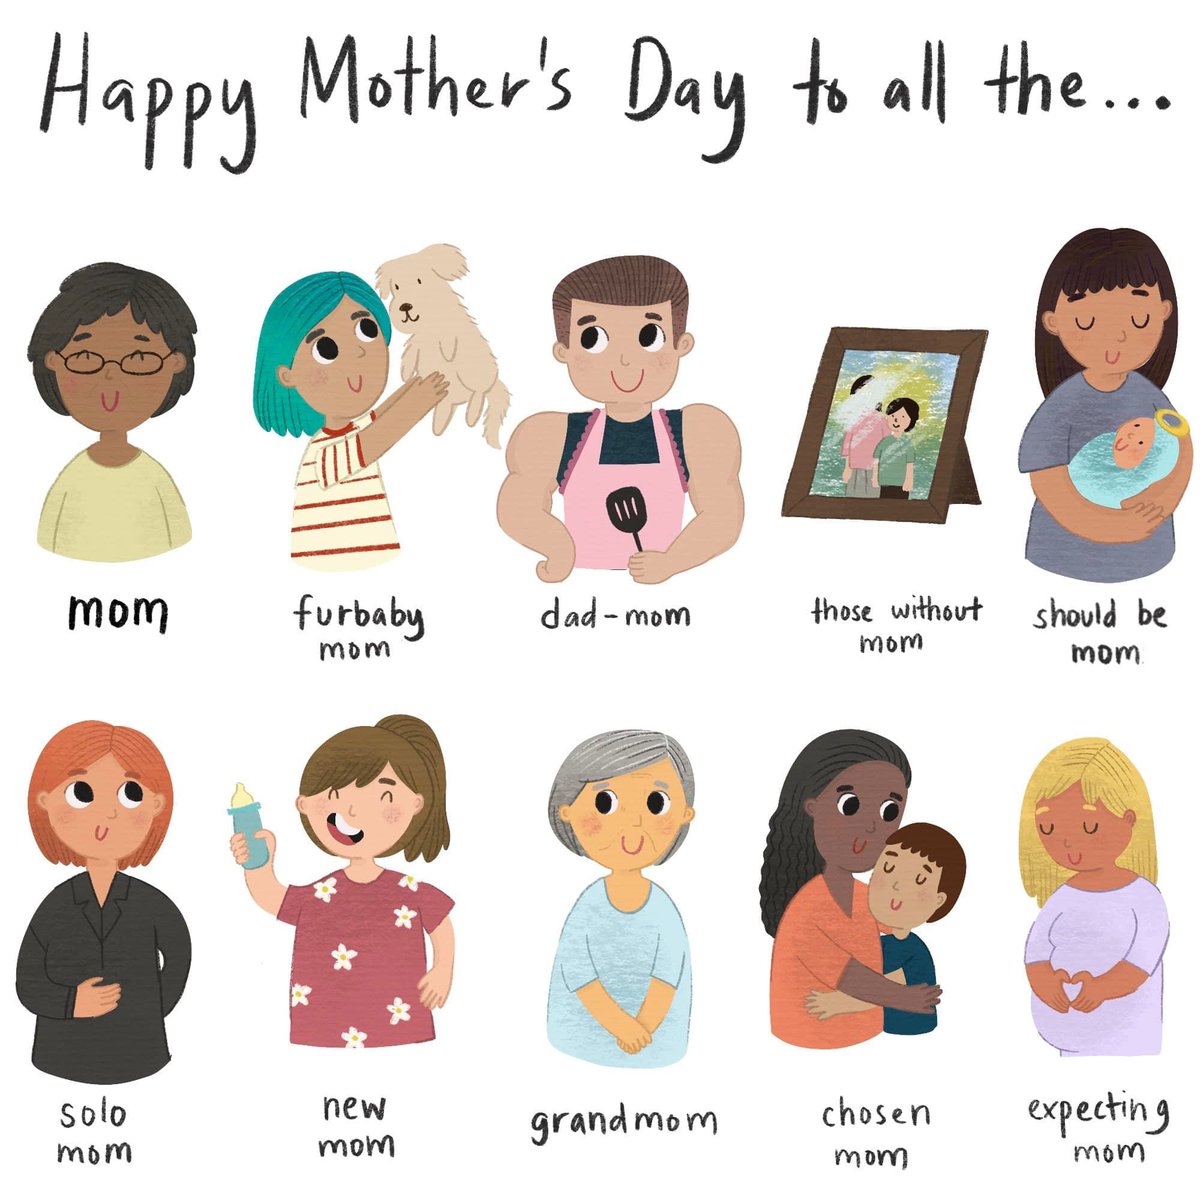 Let’s celebrate all kinds of Mom!  Happy Mother's Day!!! 😍💐 #HappyMothersDay2023